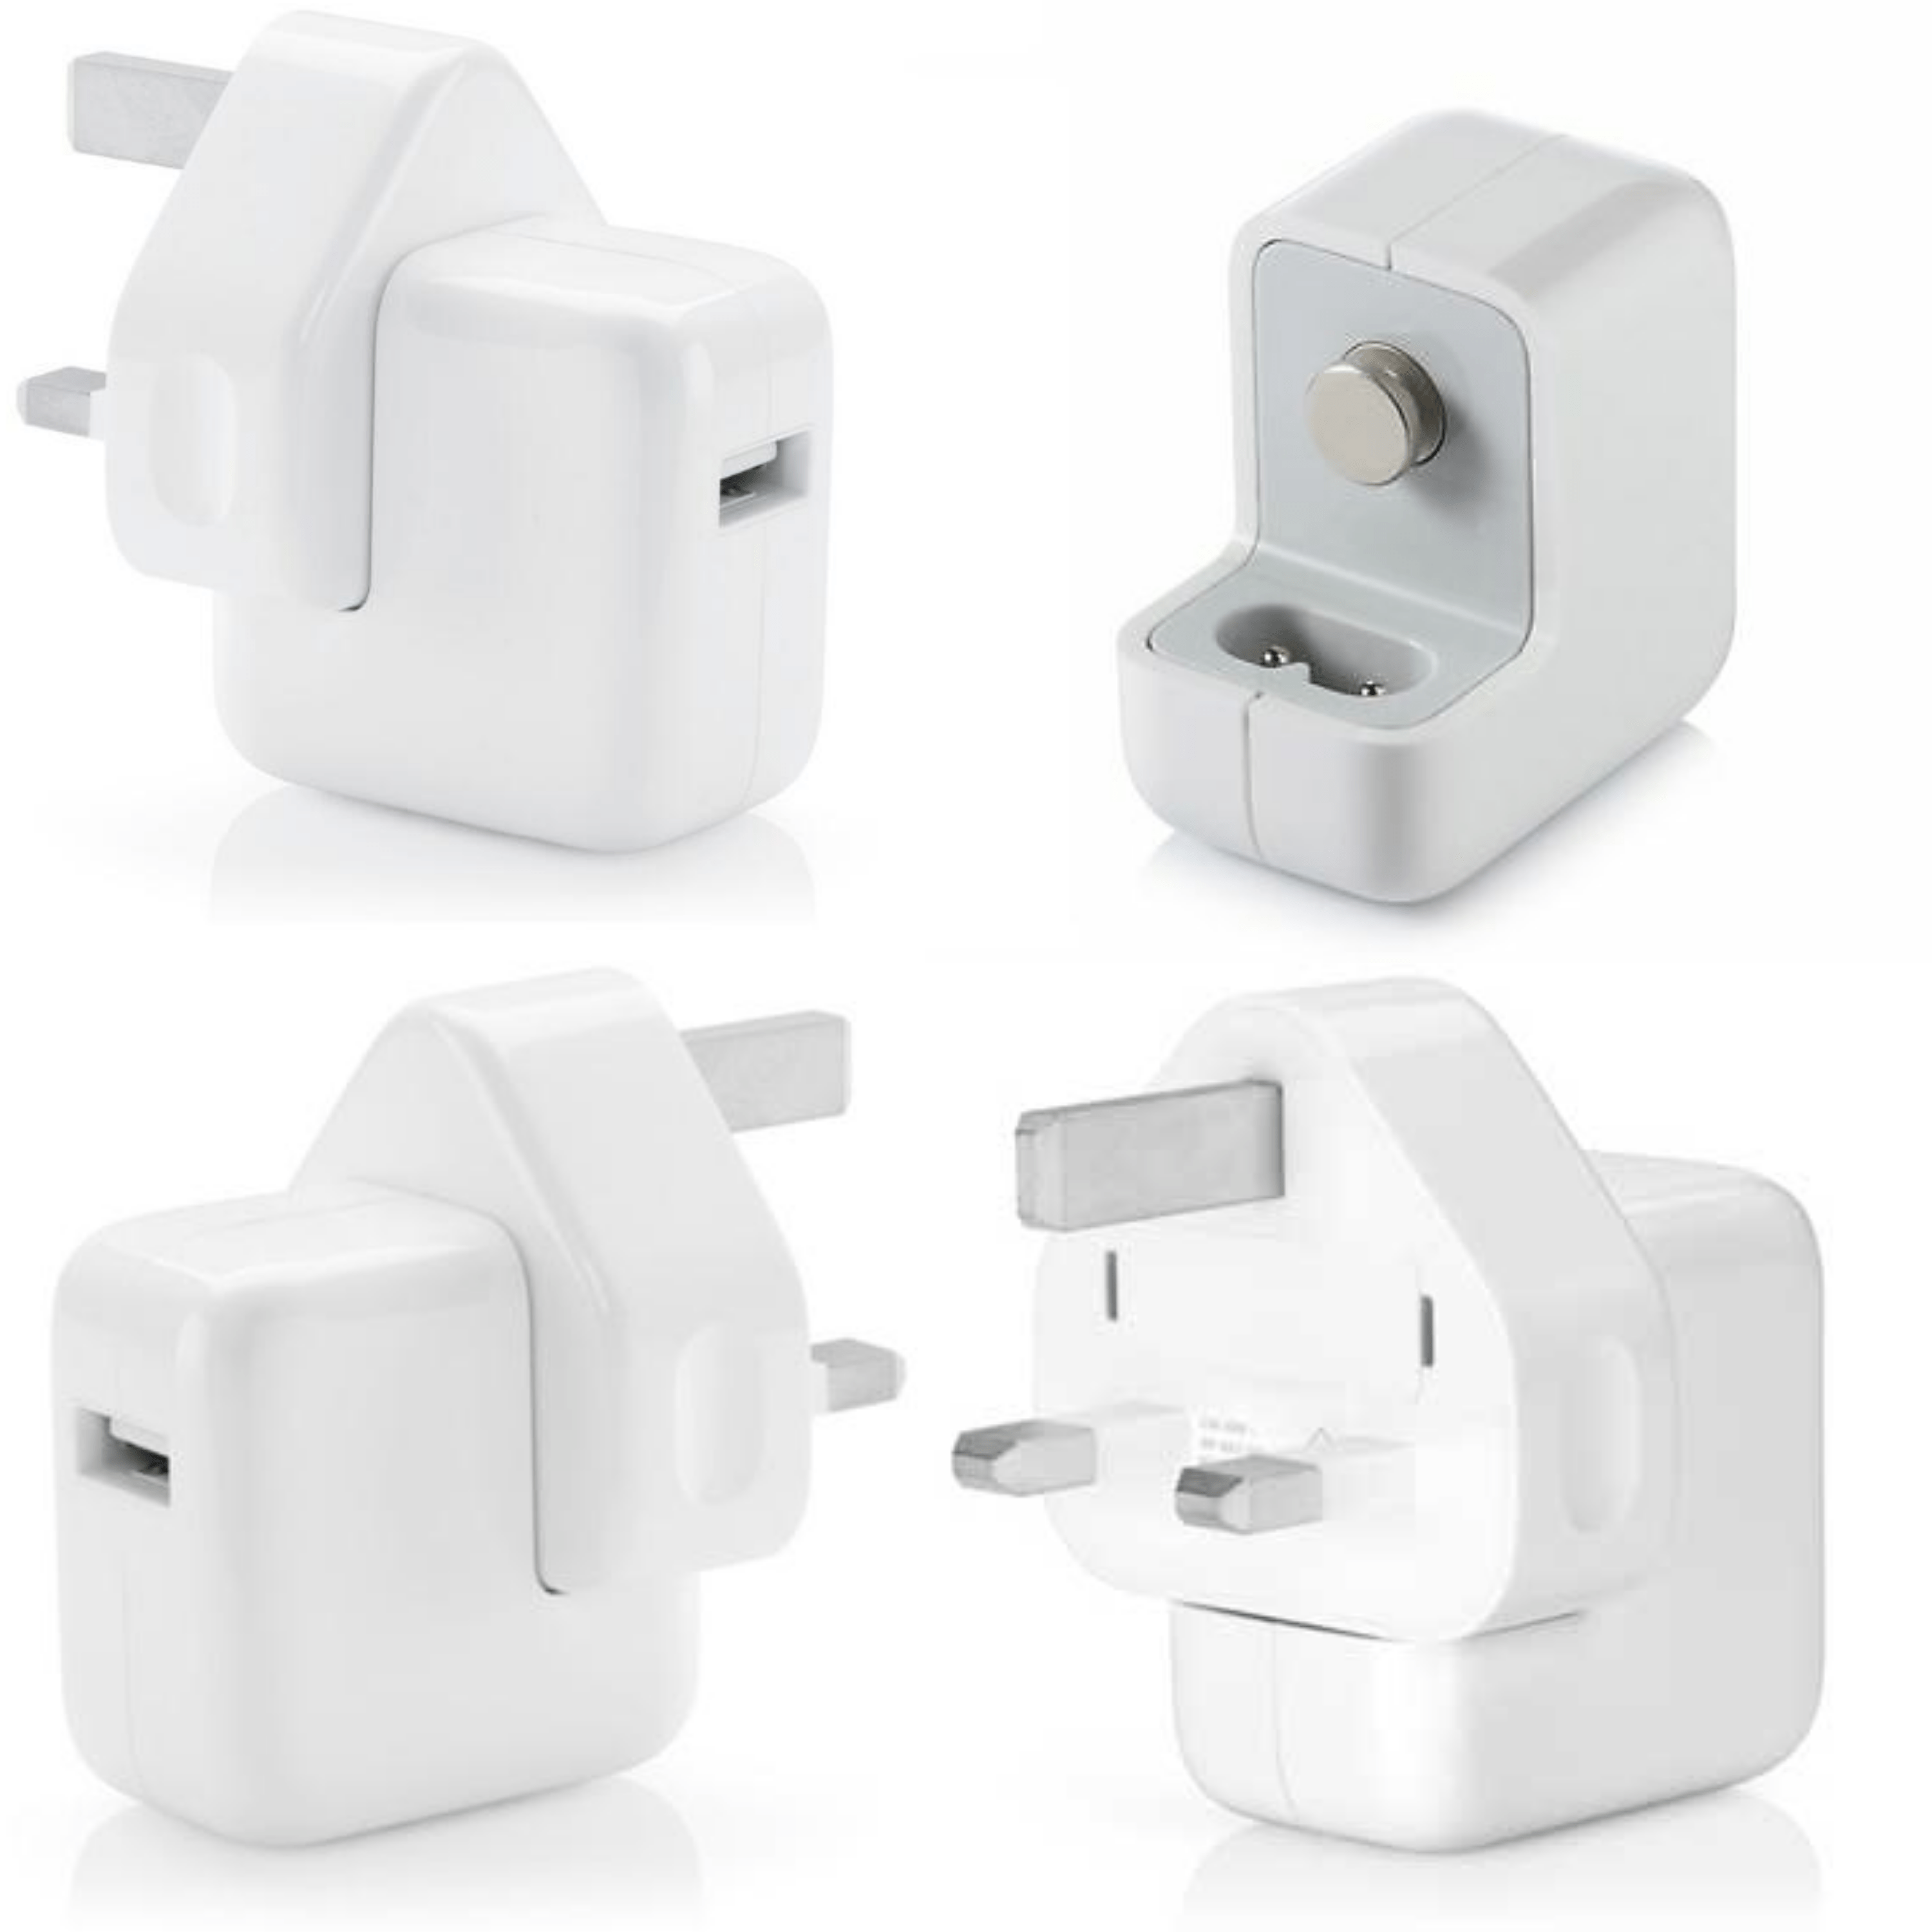 Own Brand - 12W 3-PIN UK USB Wall Charging Plug | Suits Apple Devices